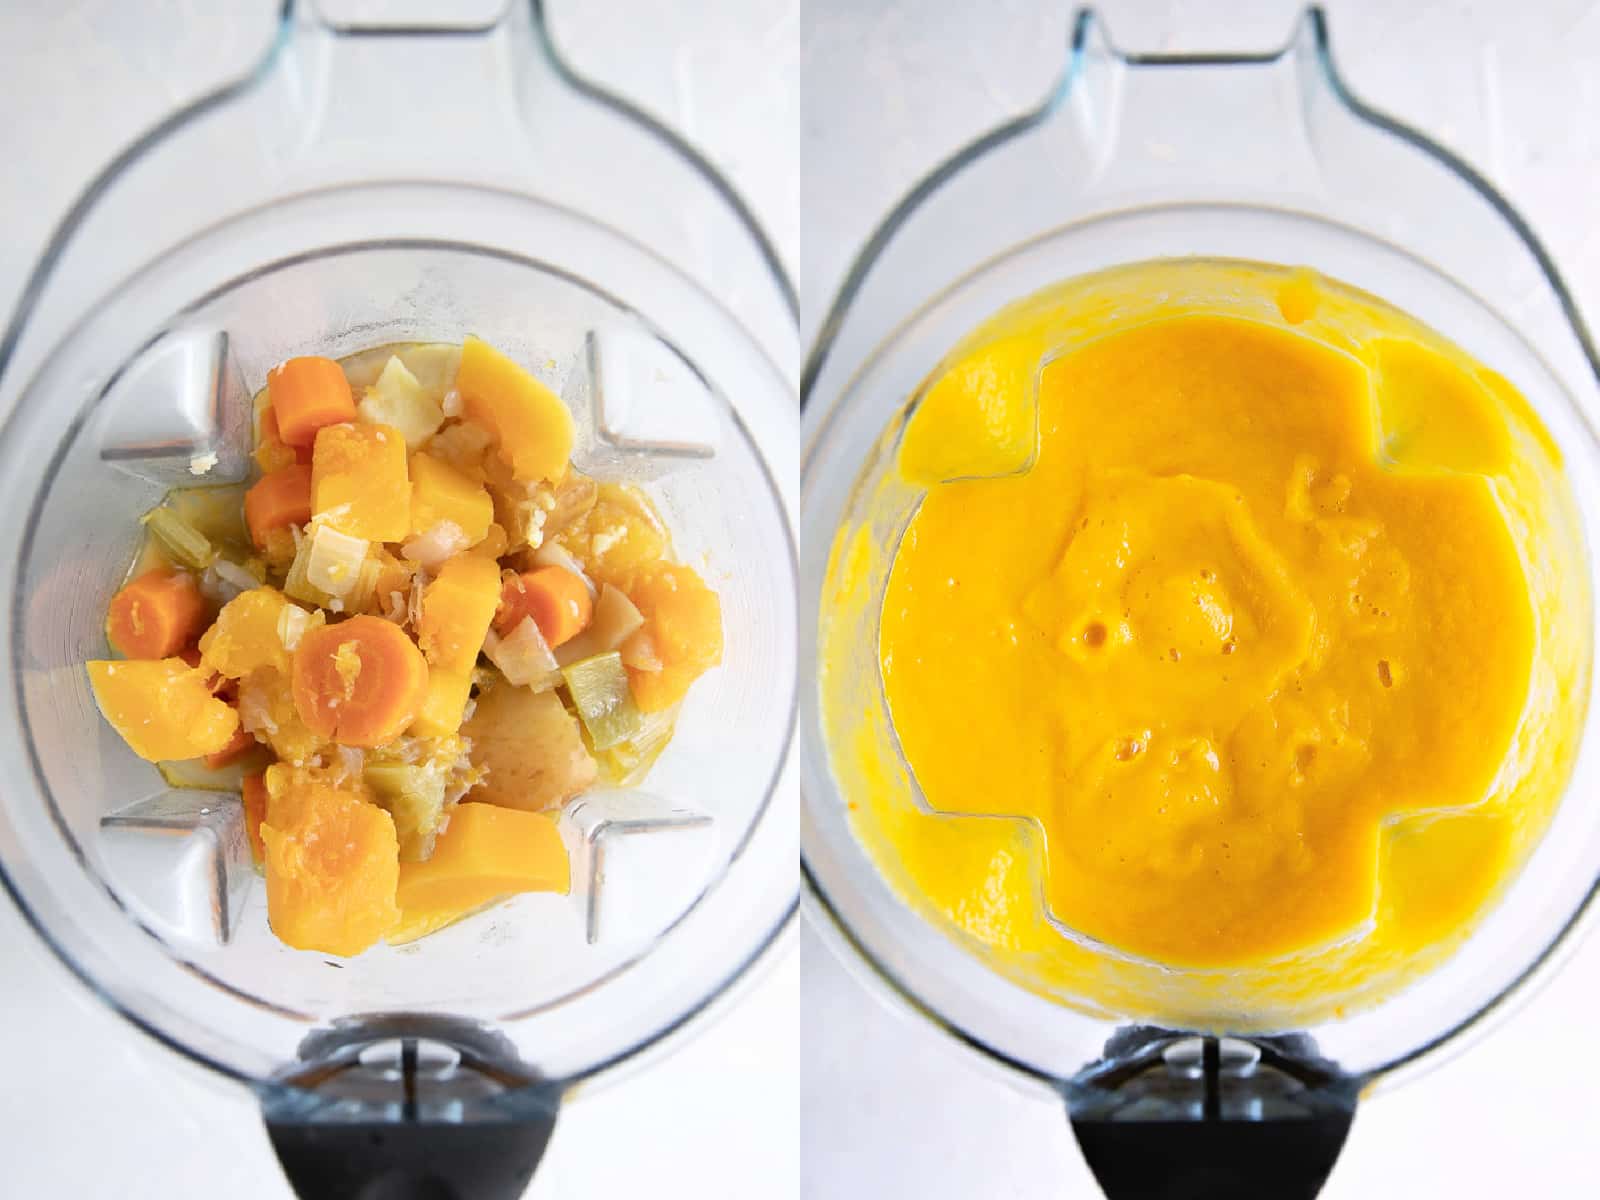 Collage of two image side-by-side, the first image with softened vegetables and butternut squash in a blender and the second with pureed butternut squash soup in the same bowl of a large blender.